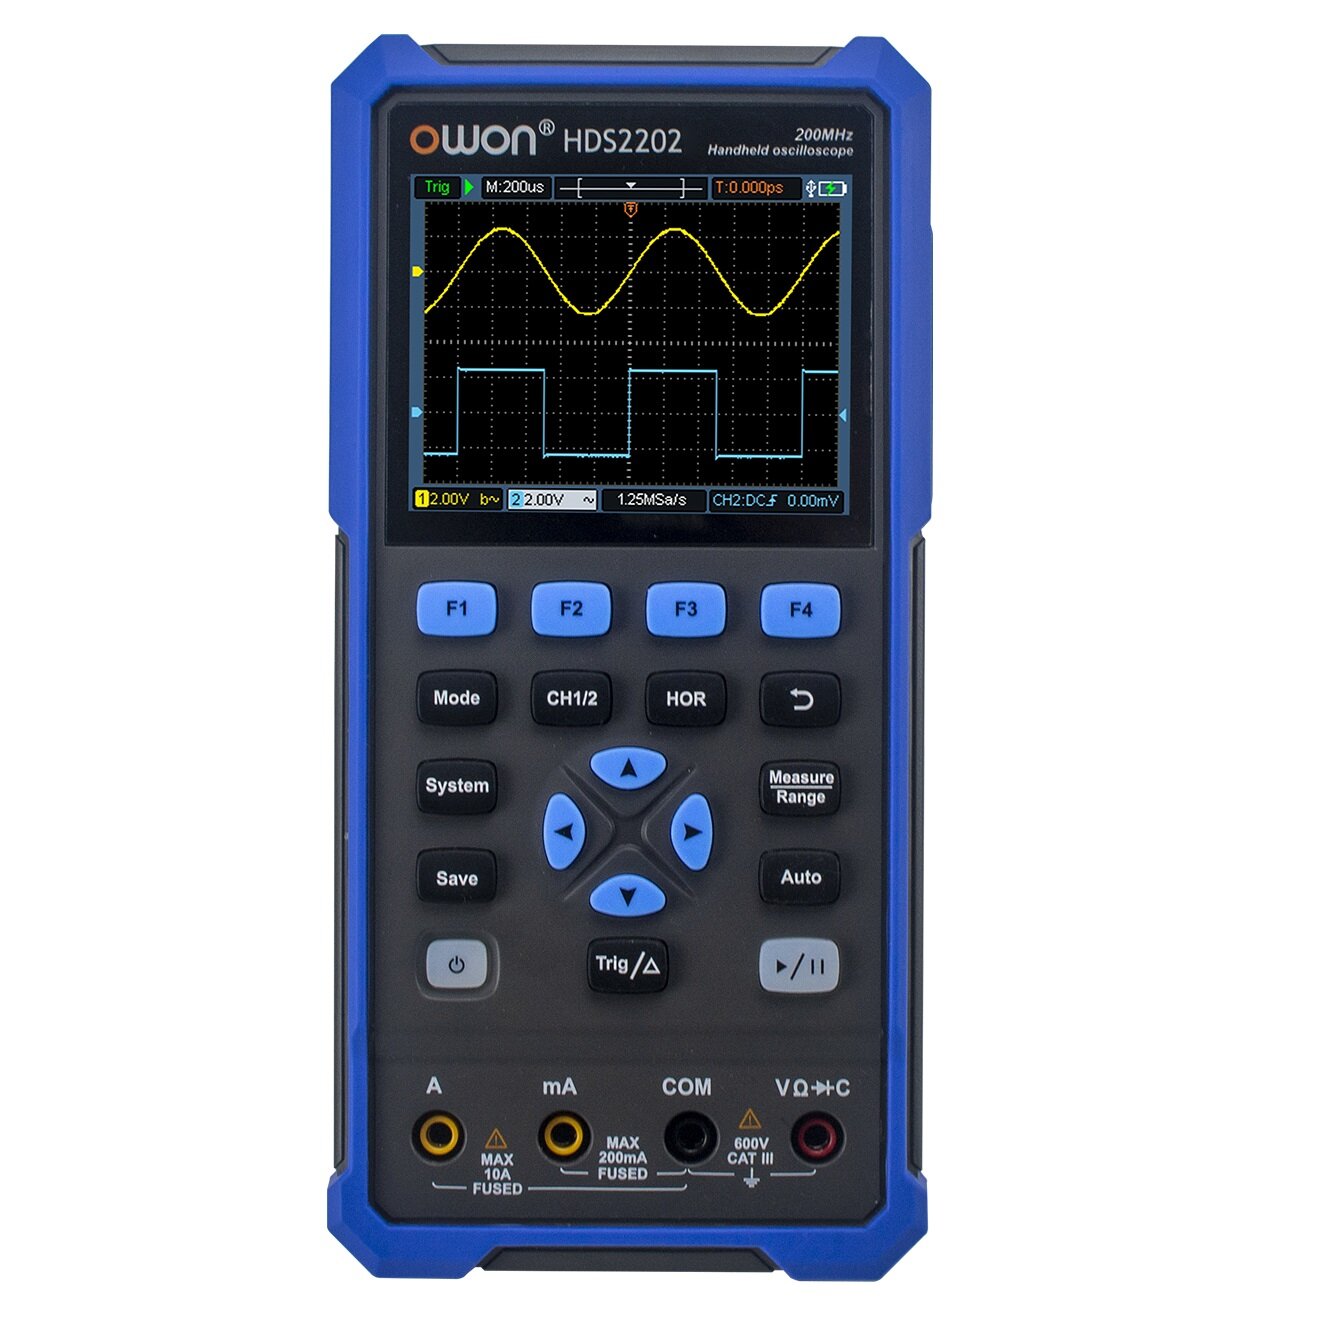 best price,owon,hds2202,2ch,handheld,oscilloscope,200mhz,coupon,price,discount